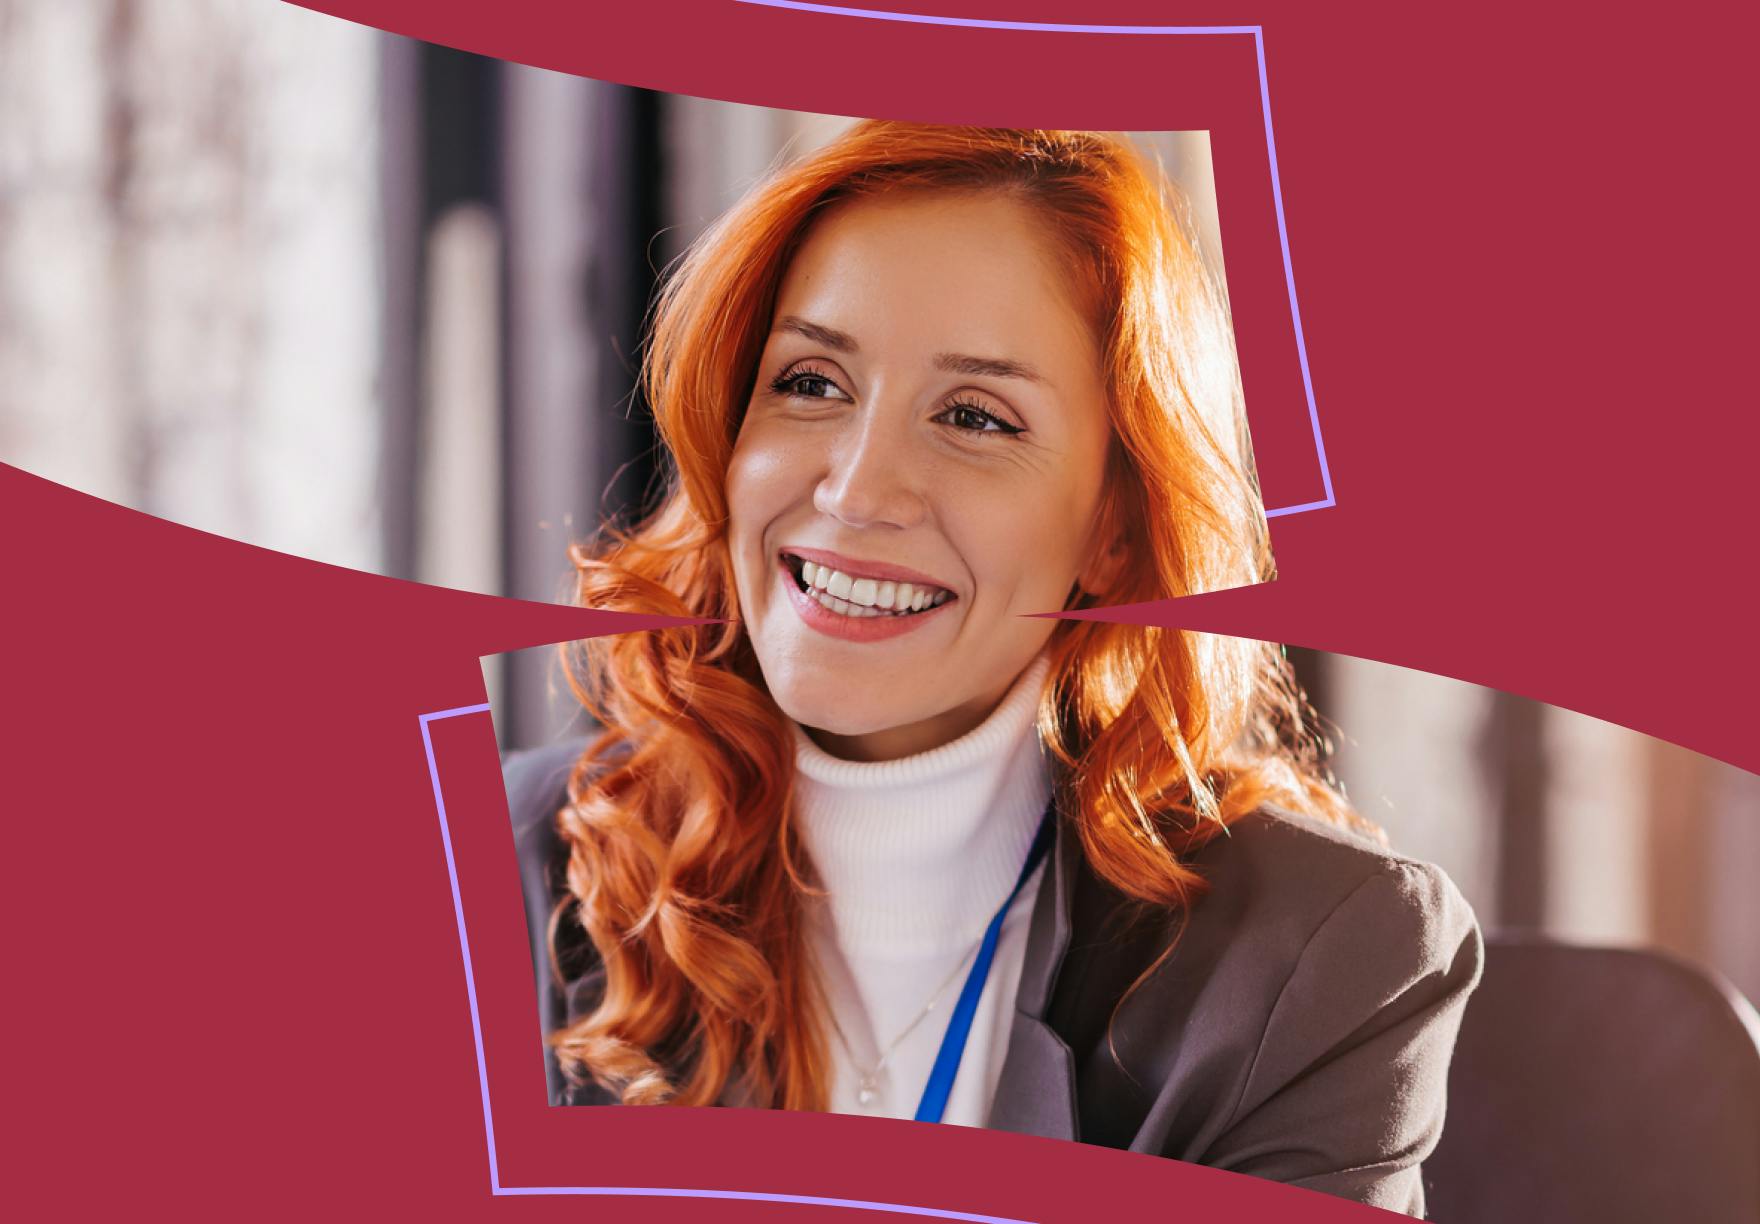 A woman with red hair smiling in front of a red background.